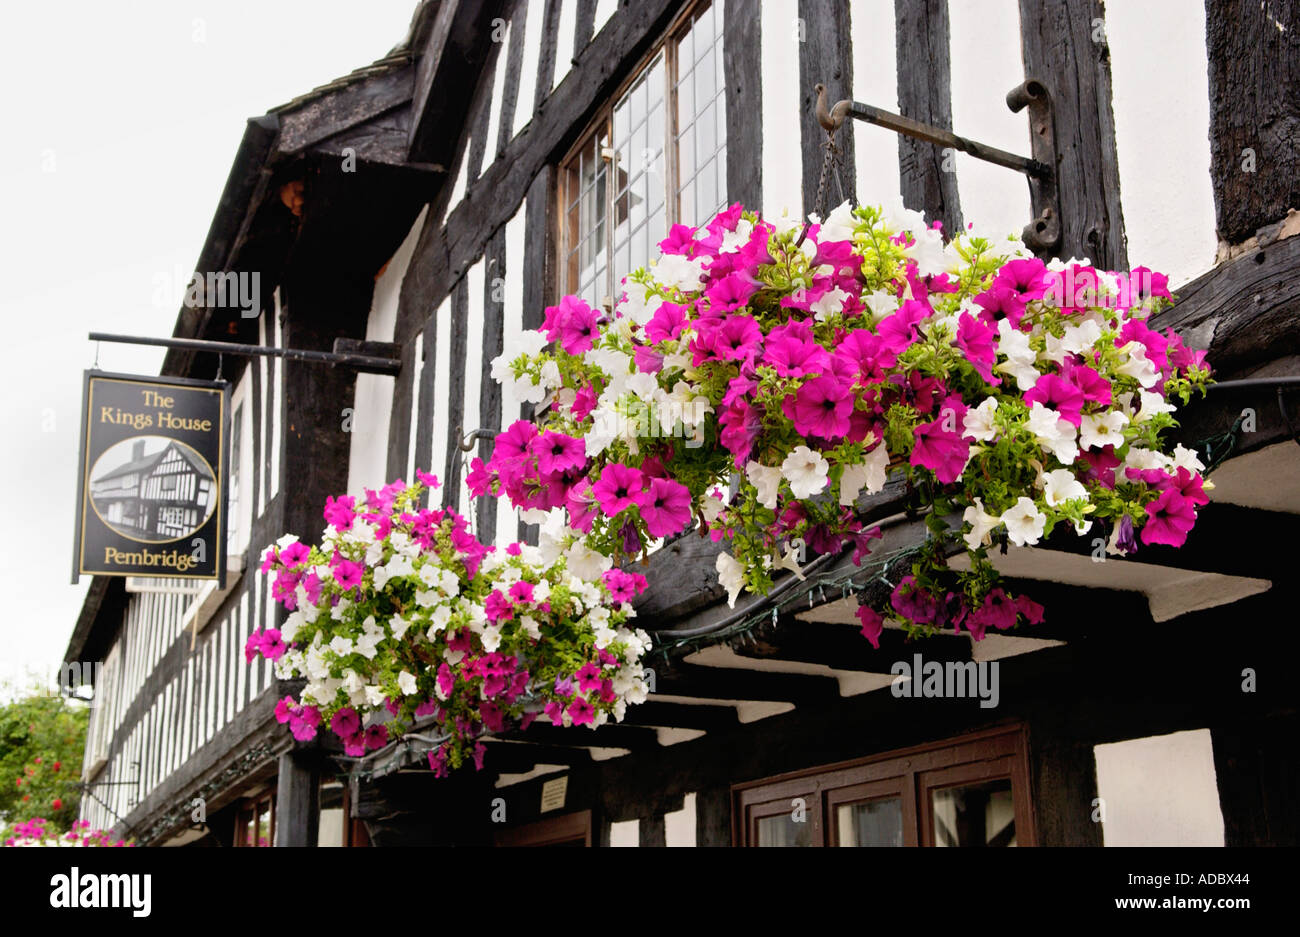 Kings House pub timber framed medieval 15th century building at Pembridge Herefordshire England UK Stock Photo